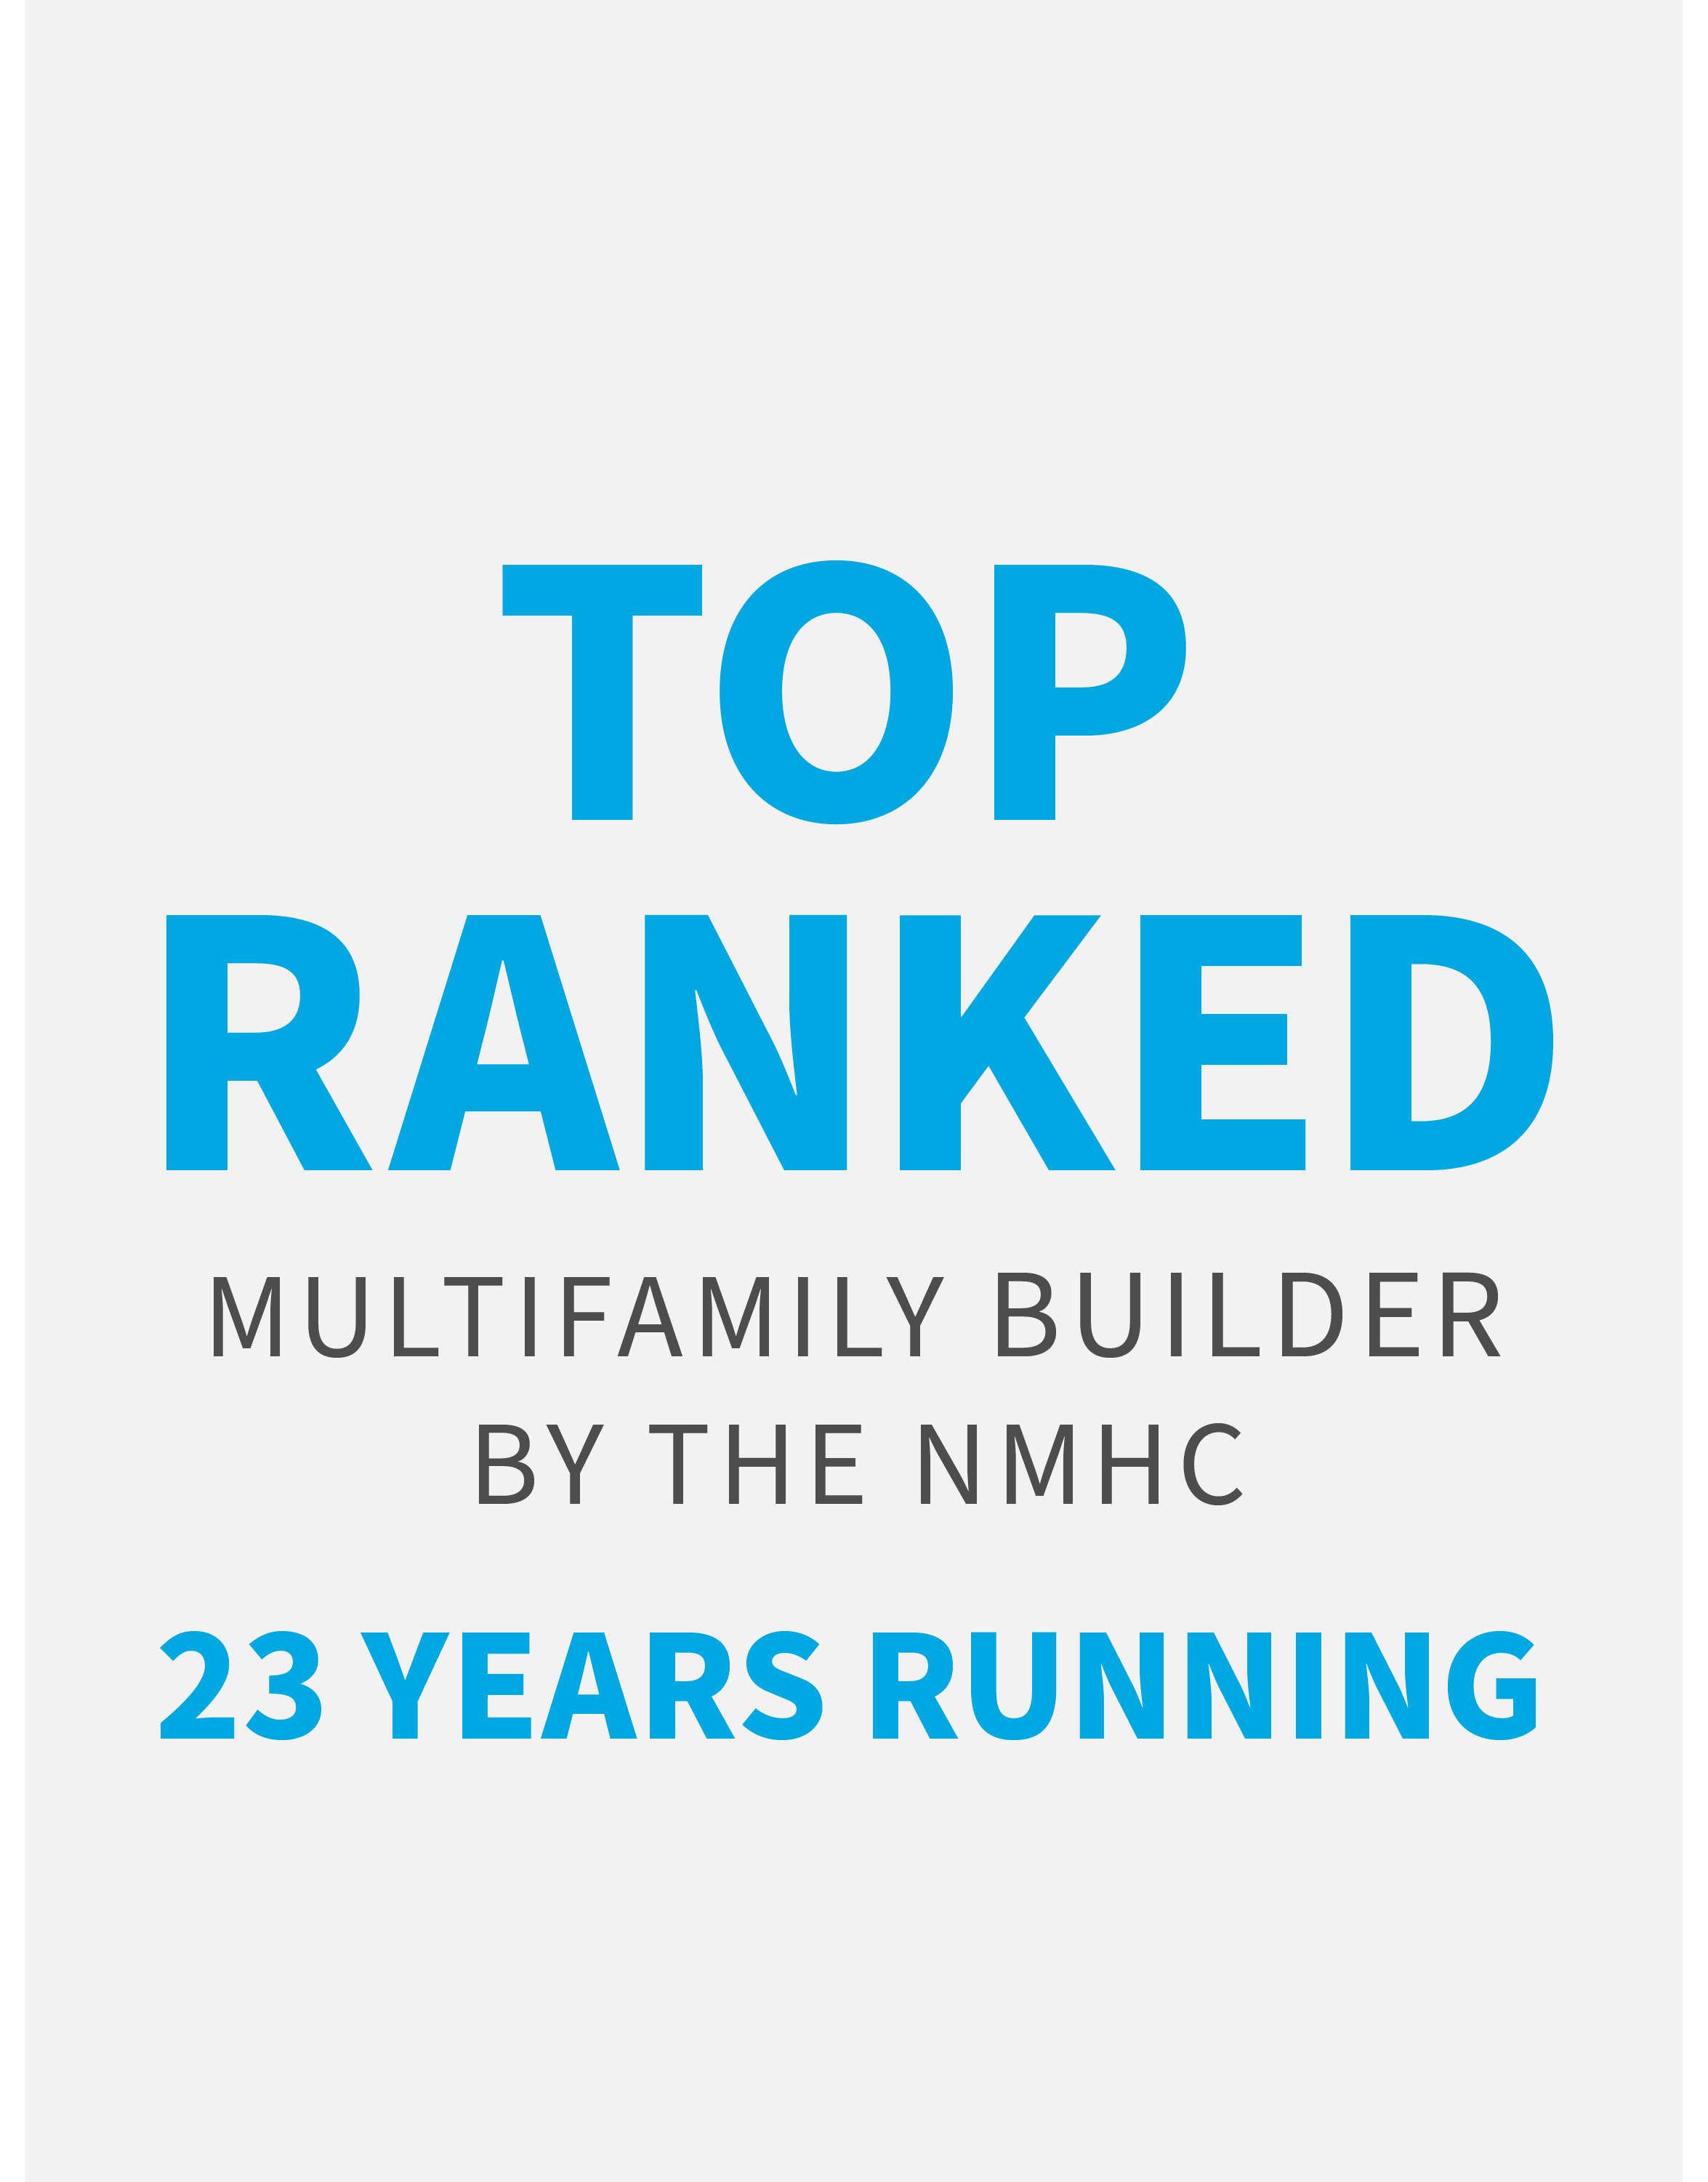 CBG is one of the top ranked multifamily builders in the country